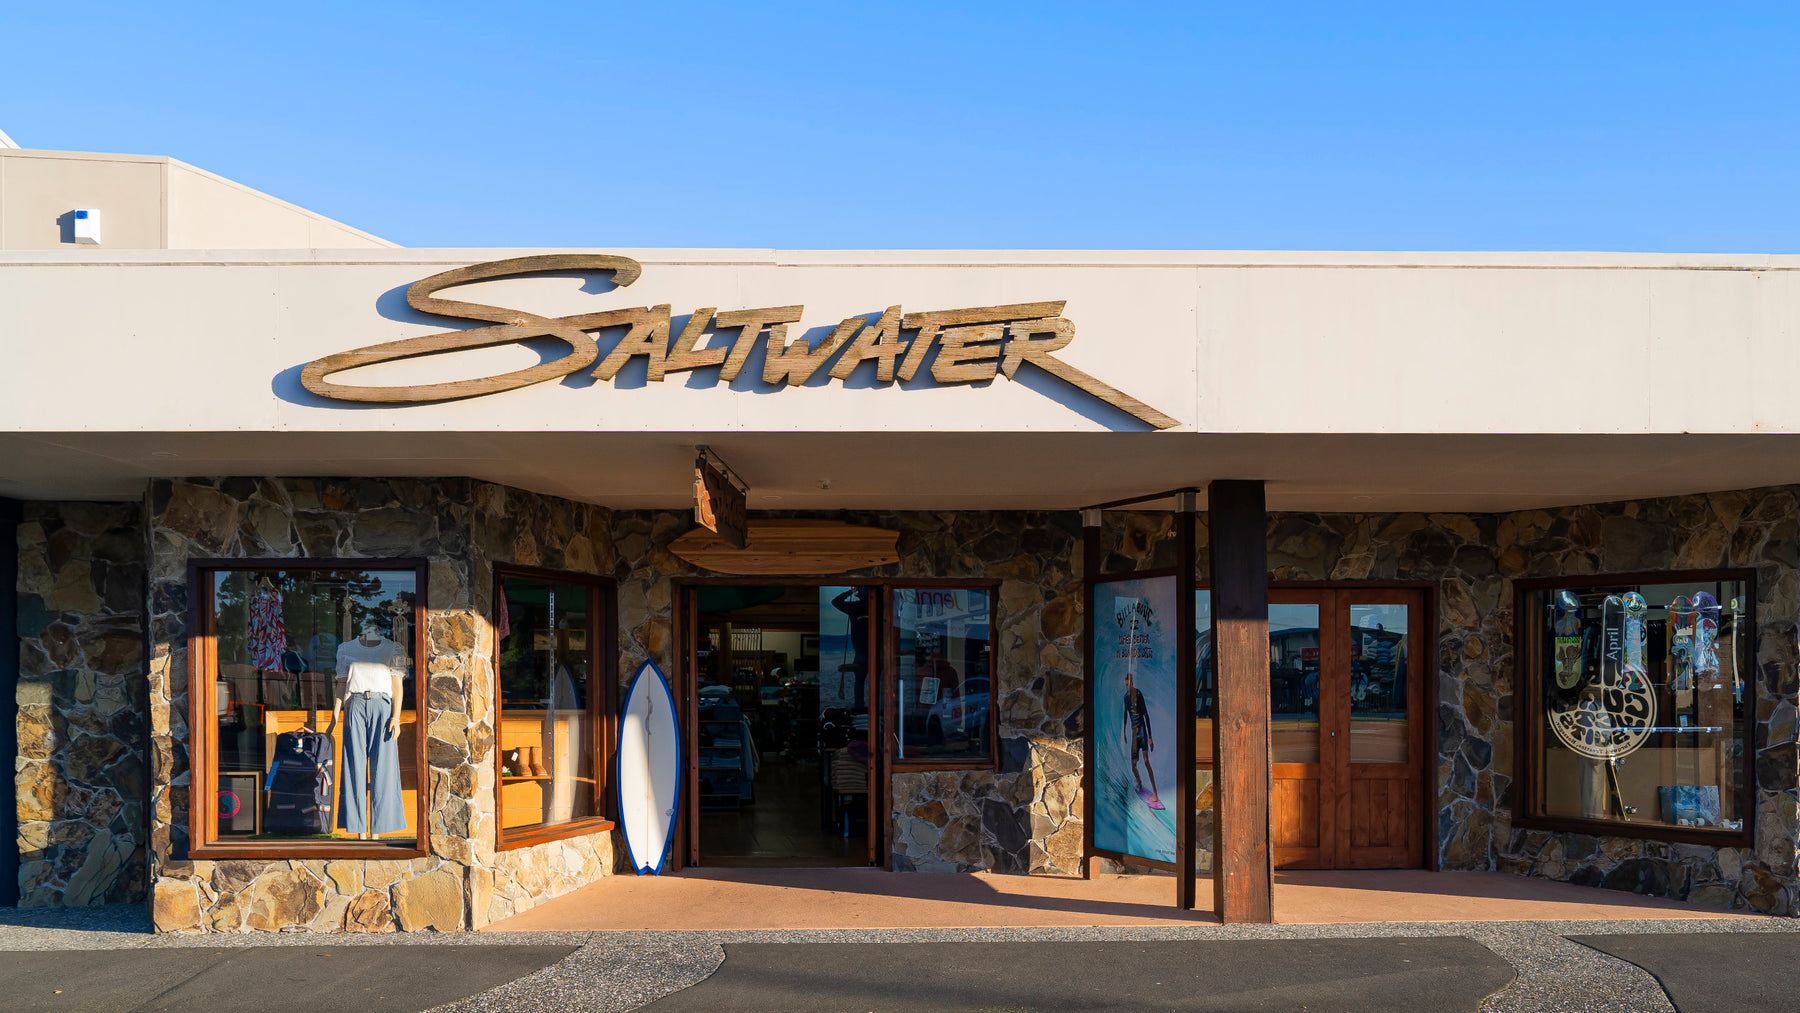 The Saltwater shop front in a beautiful sunrise light.